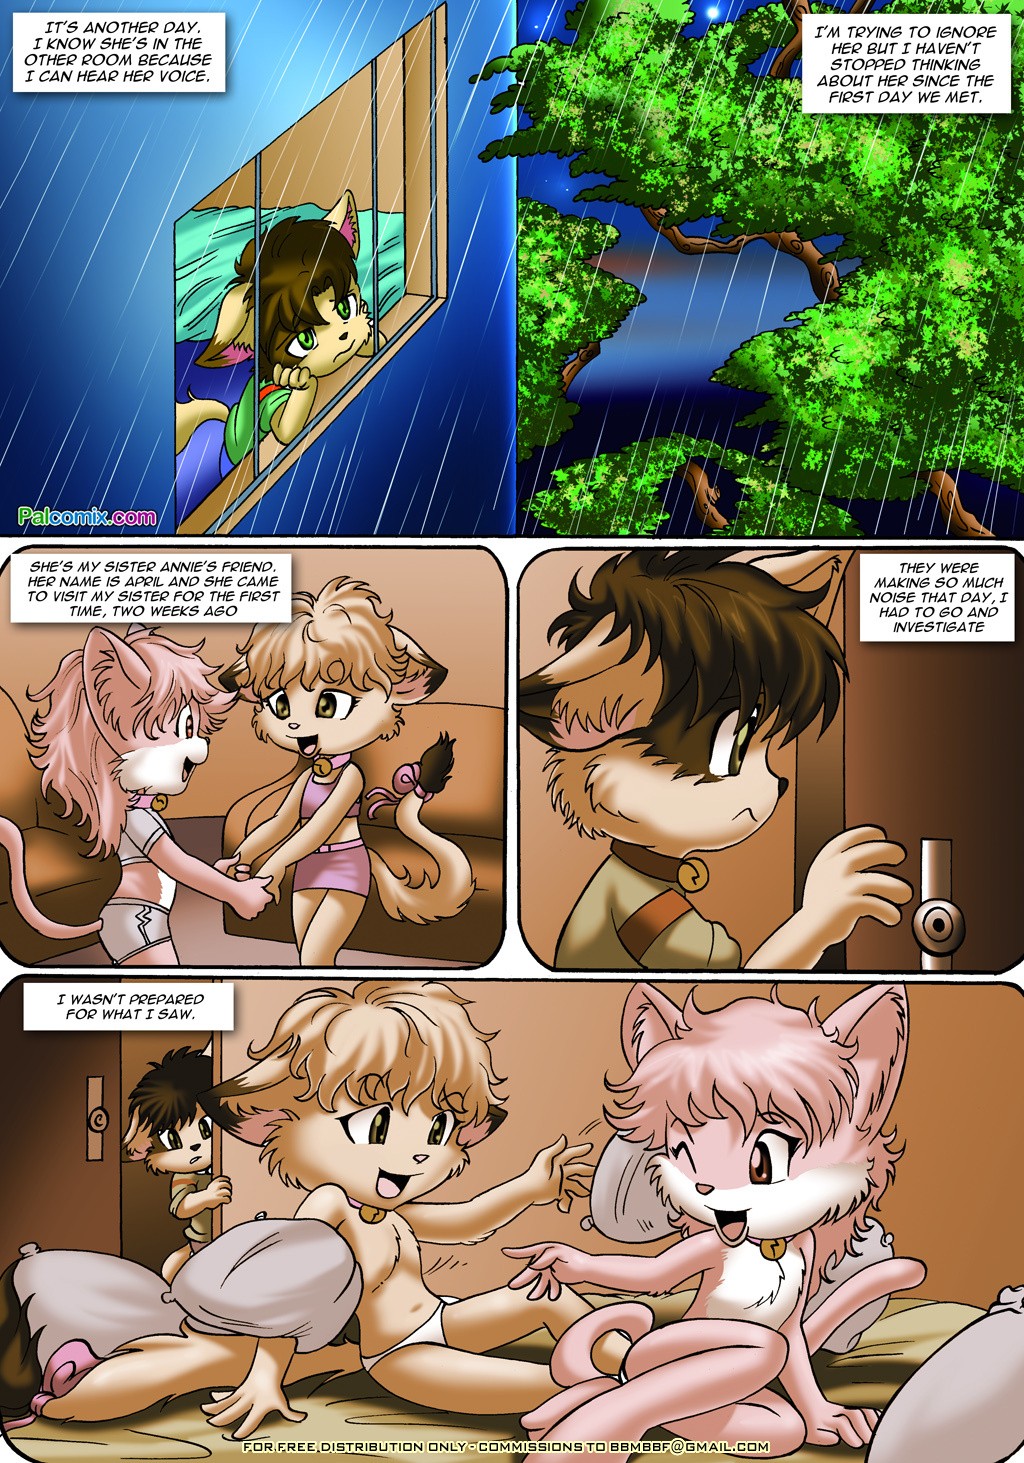 Those Good Old Games - Chapter 2 - Here Comes April porn comic picture 2